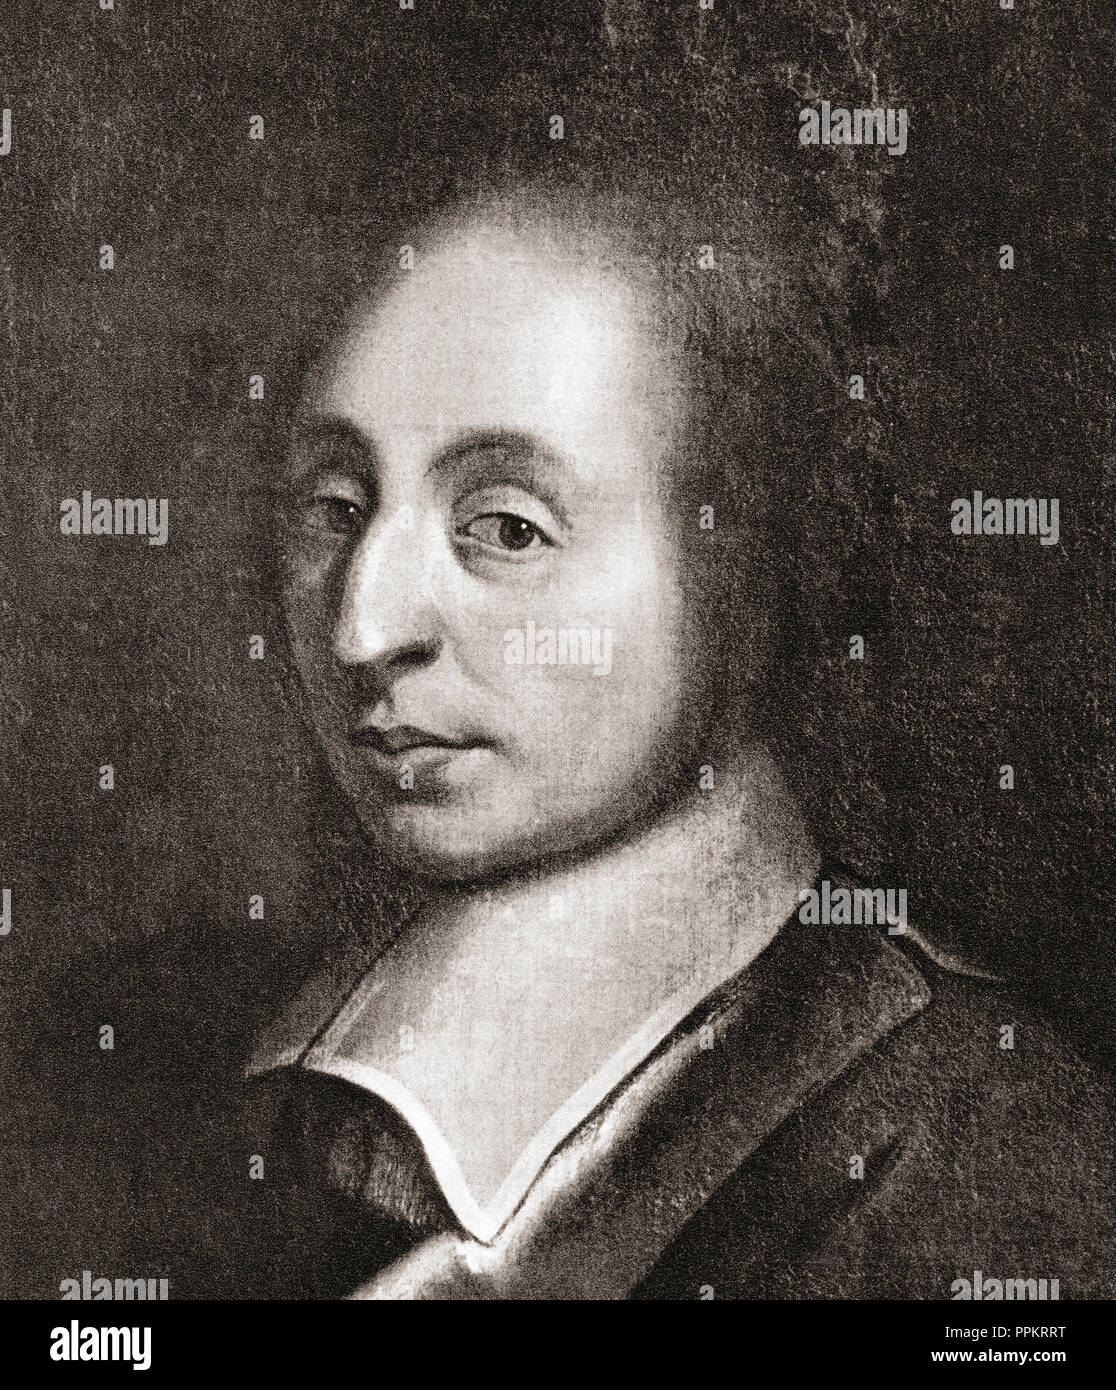 Blaise Pascal, 1623 - 1662.  French mathematician, physicist, inventor, writer and Catholic theologian. Stock Photo